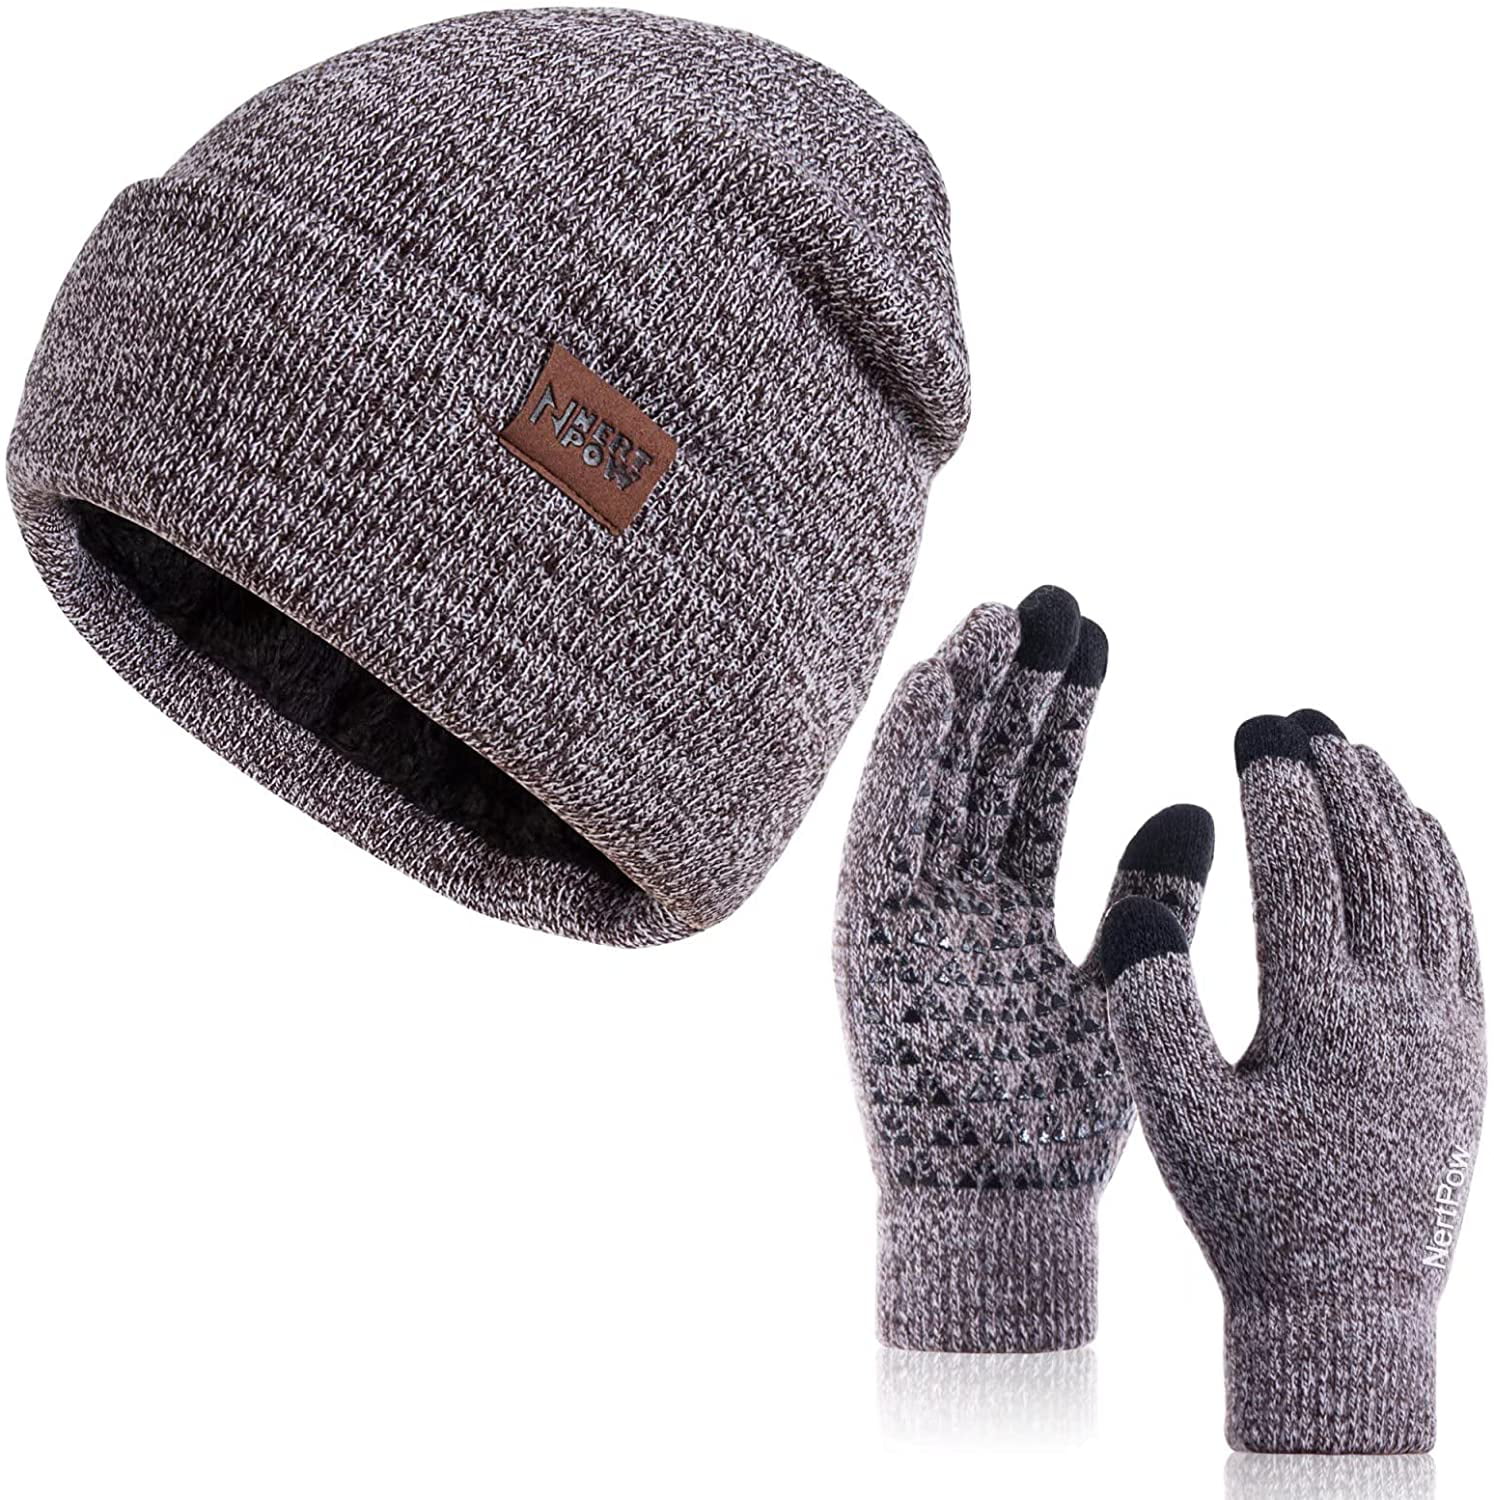 Winter 1-3 PCS Beanie Hat Gloves Scarf for Men and Women Knit Fleece Lined Warm Touchscreen Gloves Beanie Infitiny Scarf Set 